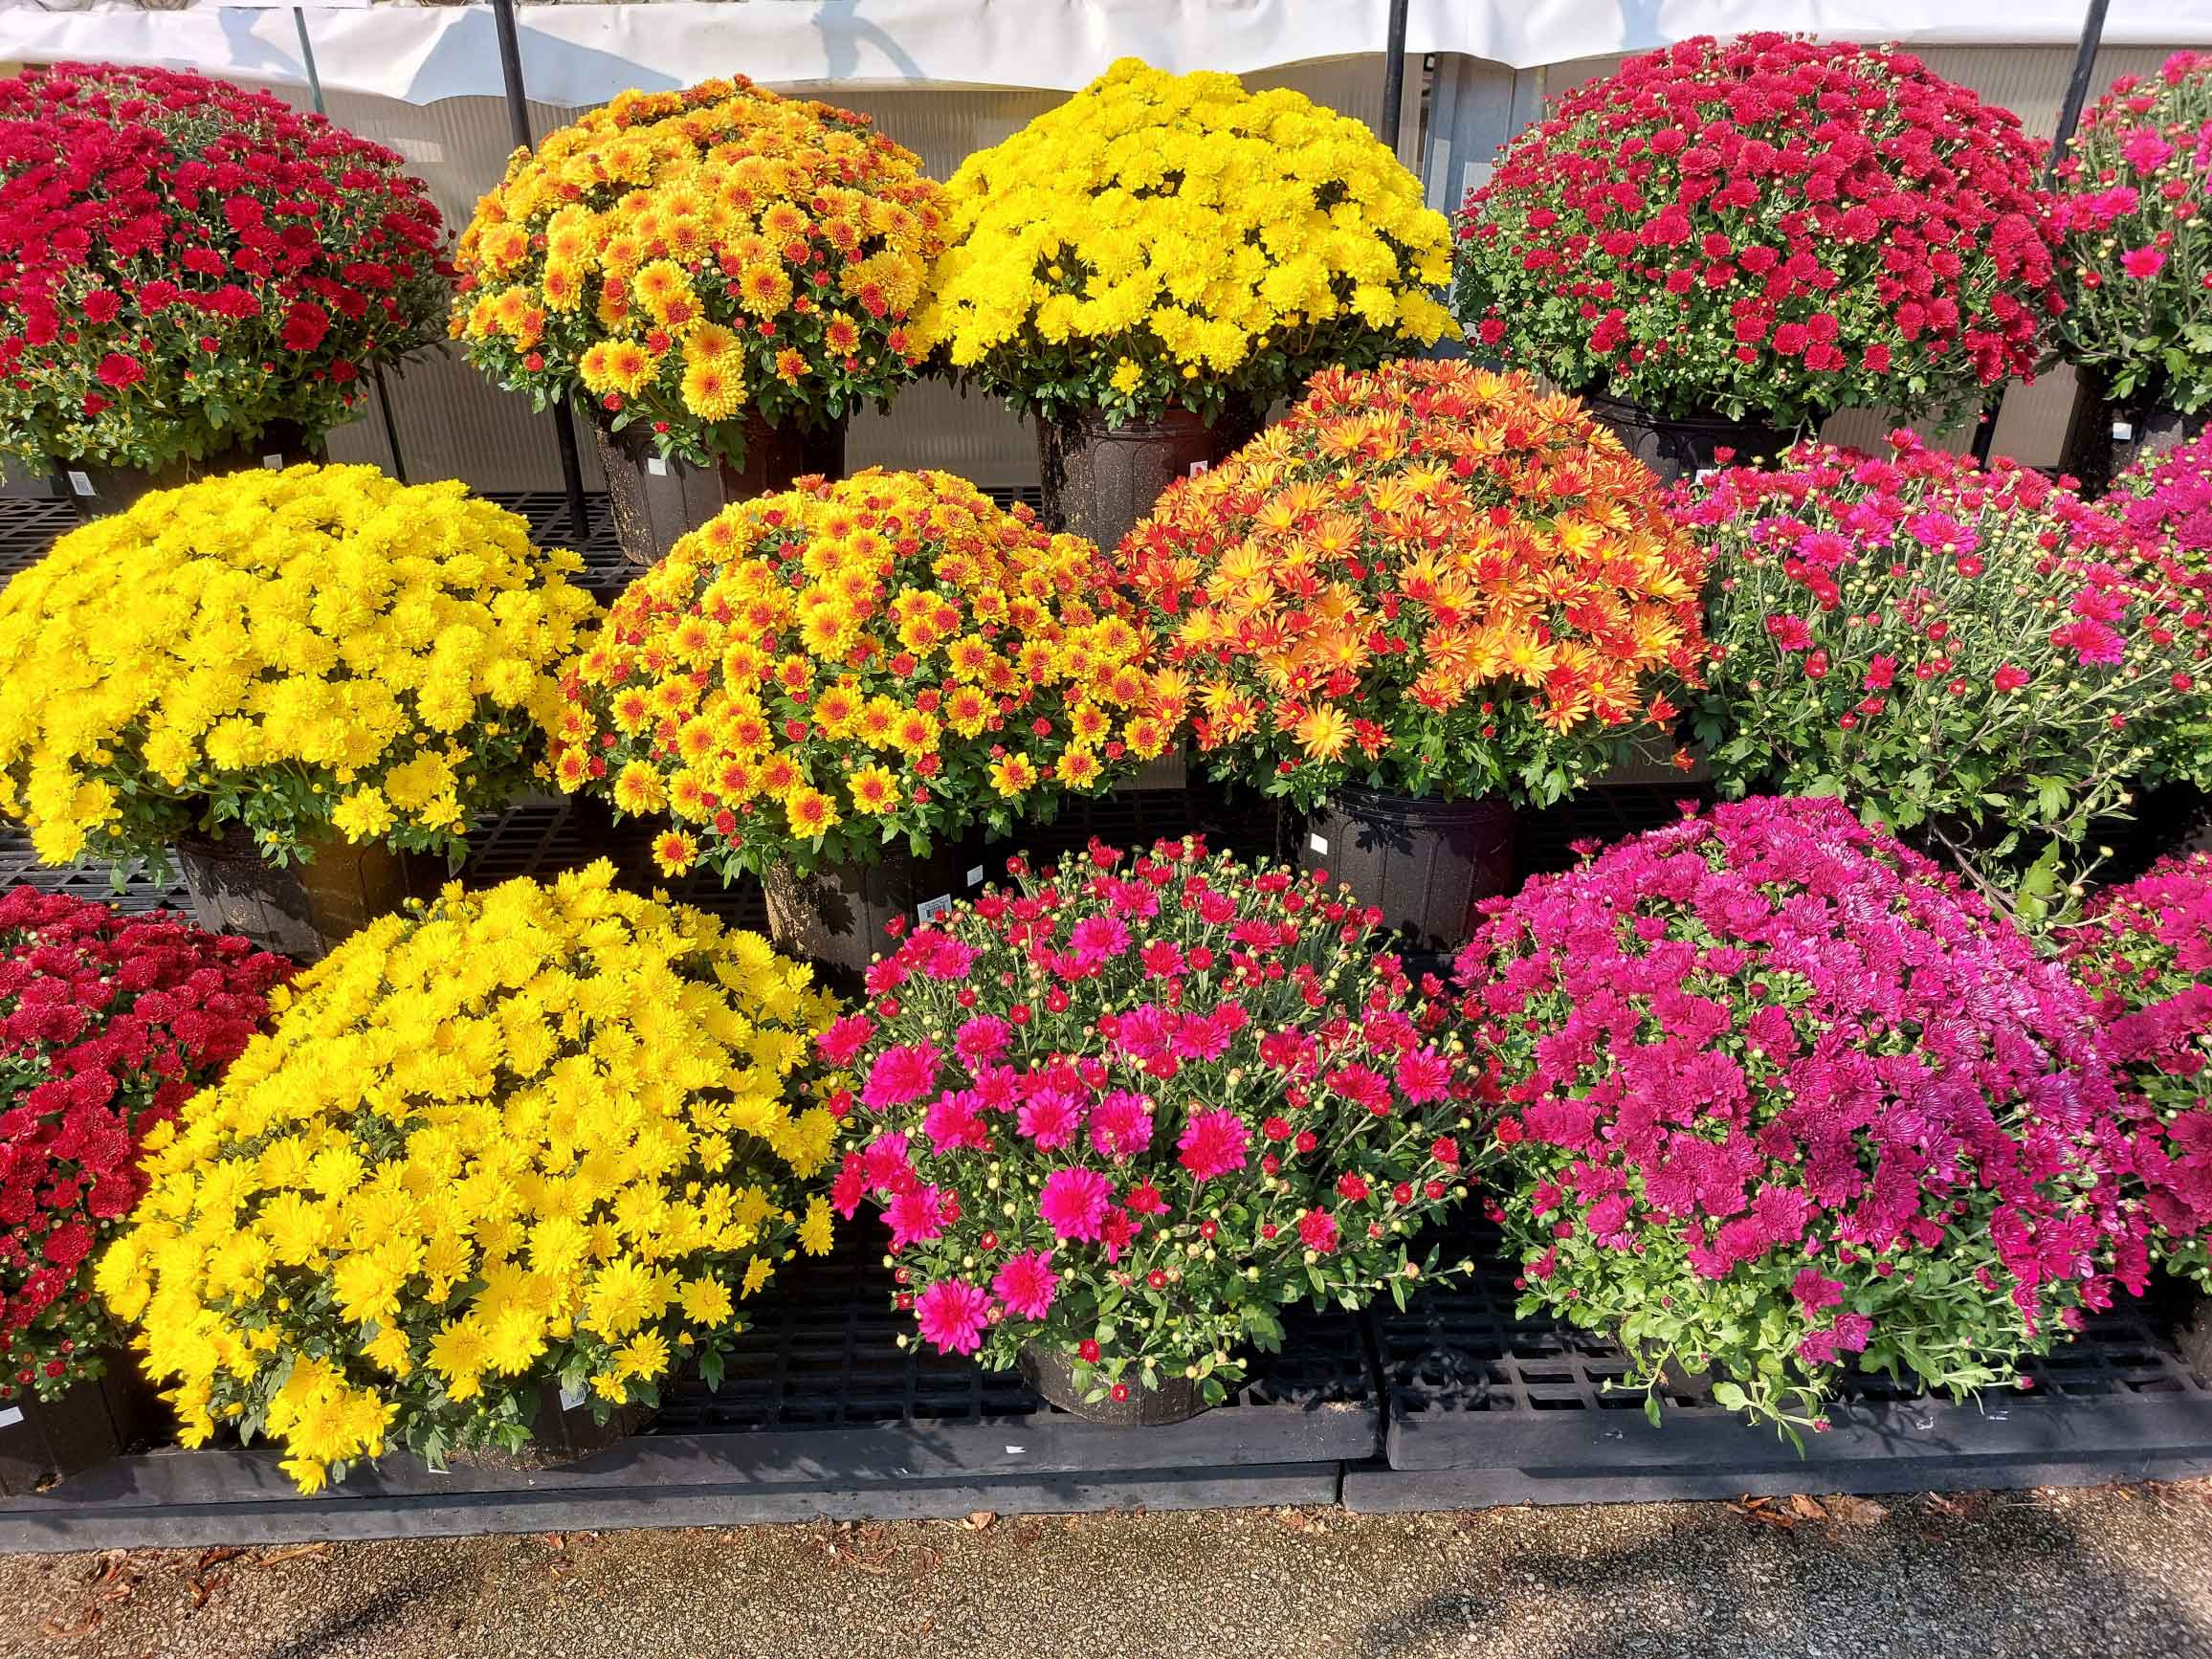 mums of varying color